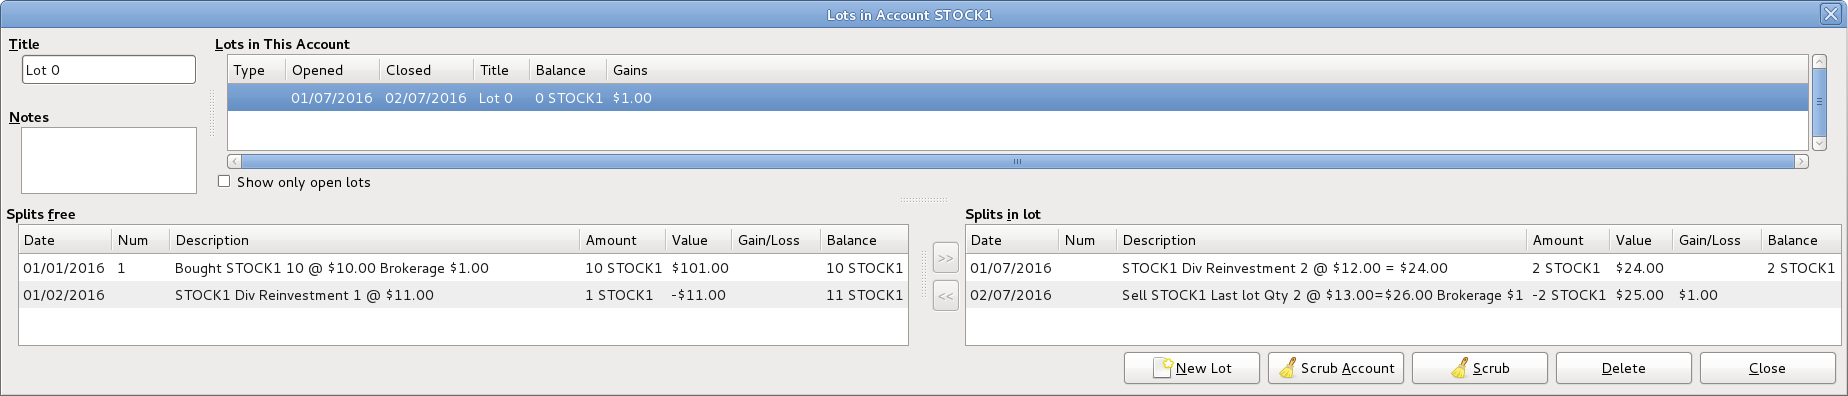 Example of Lots in Account window